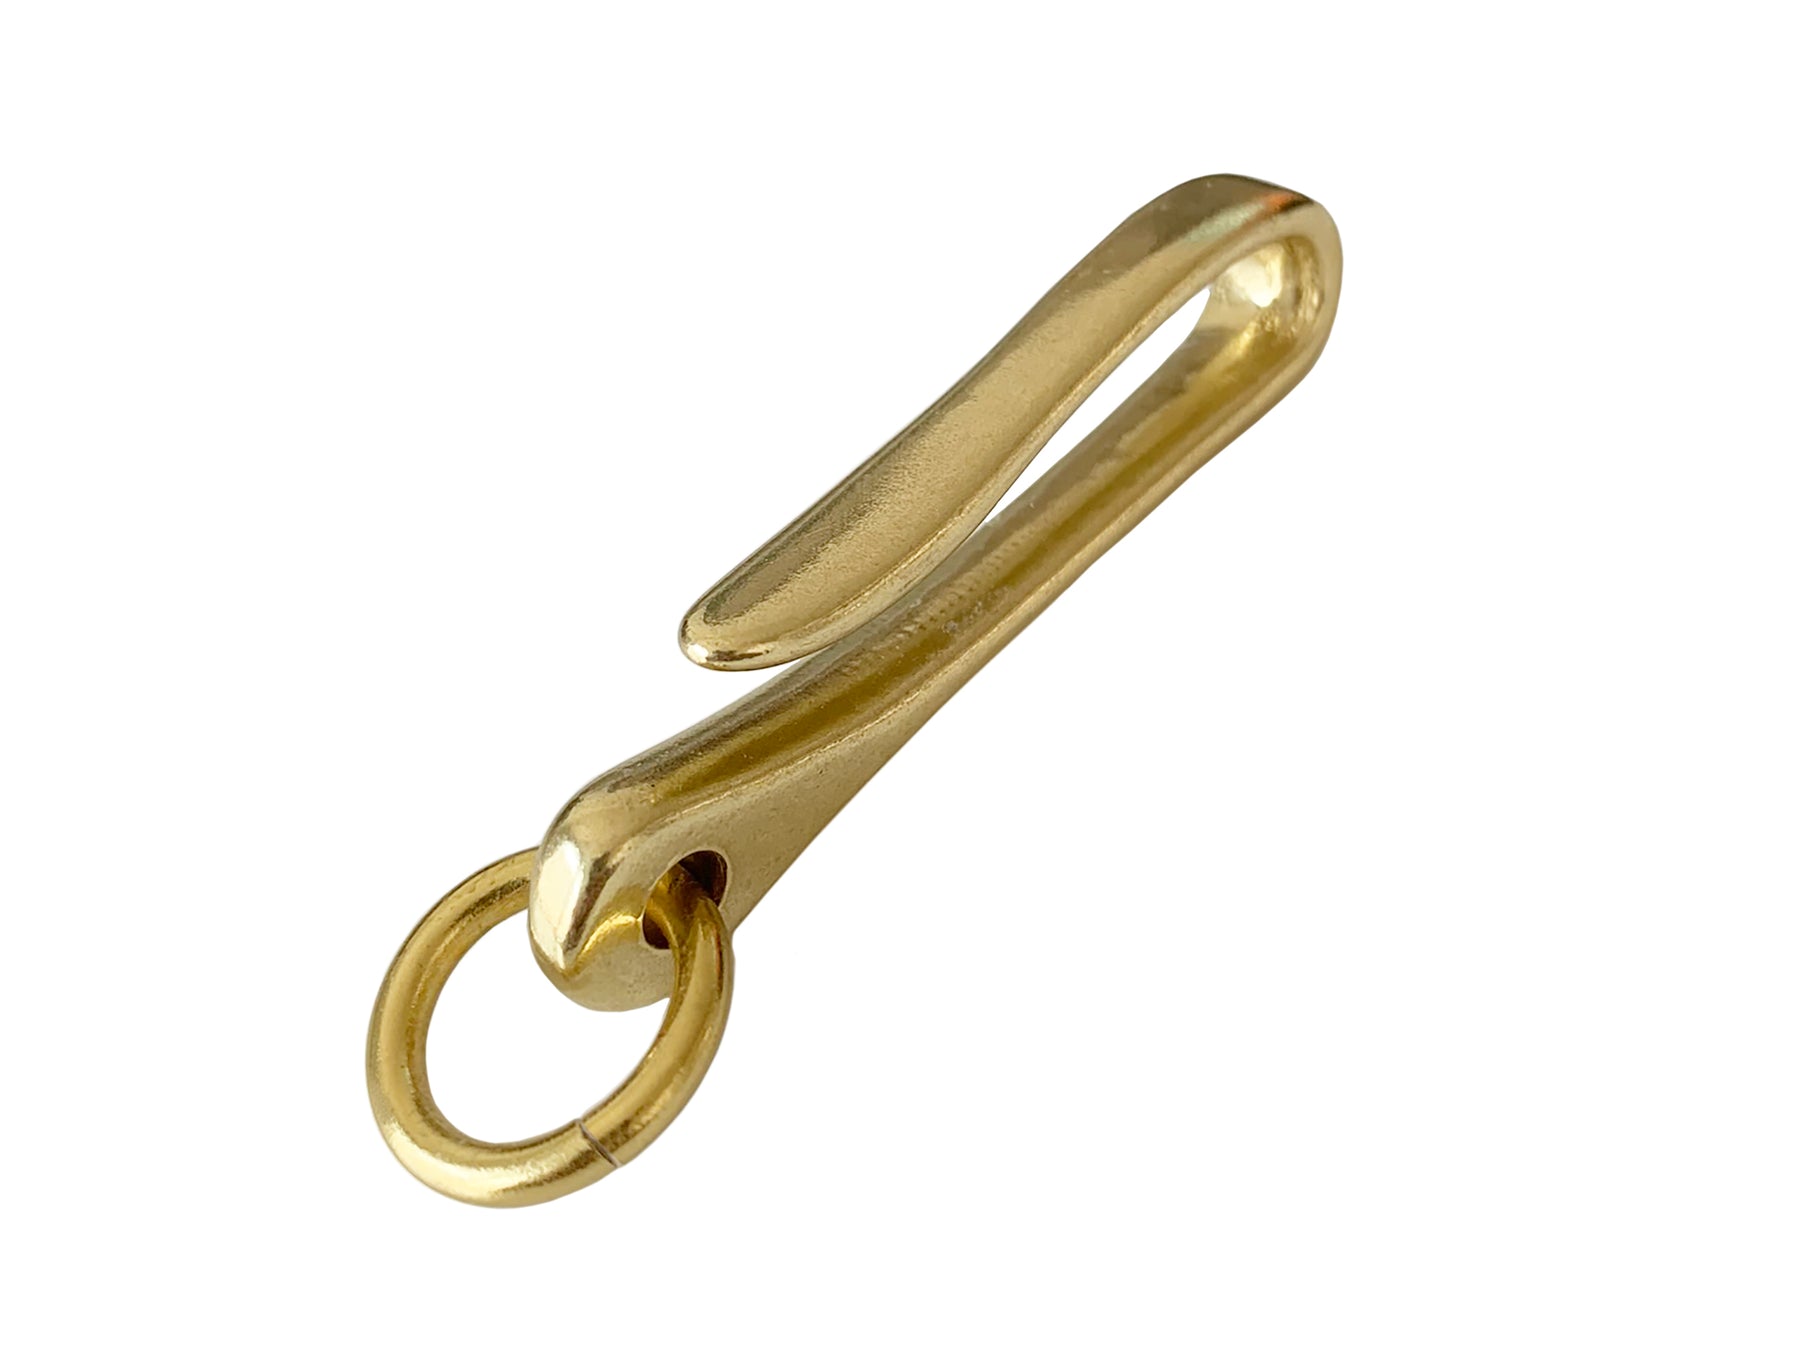 Keychain Fish Hook Hardware (Solid Brass) Medium - 60mm by Rocky Mountain Leather Supply